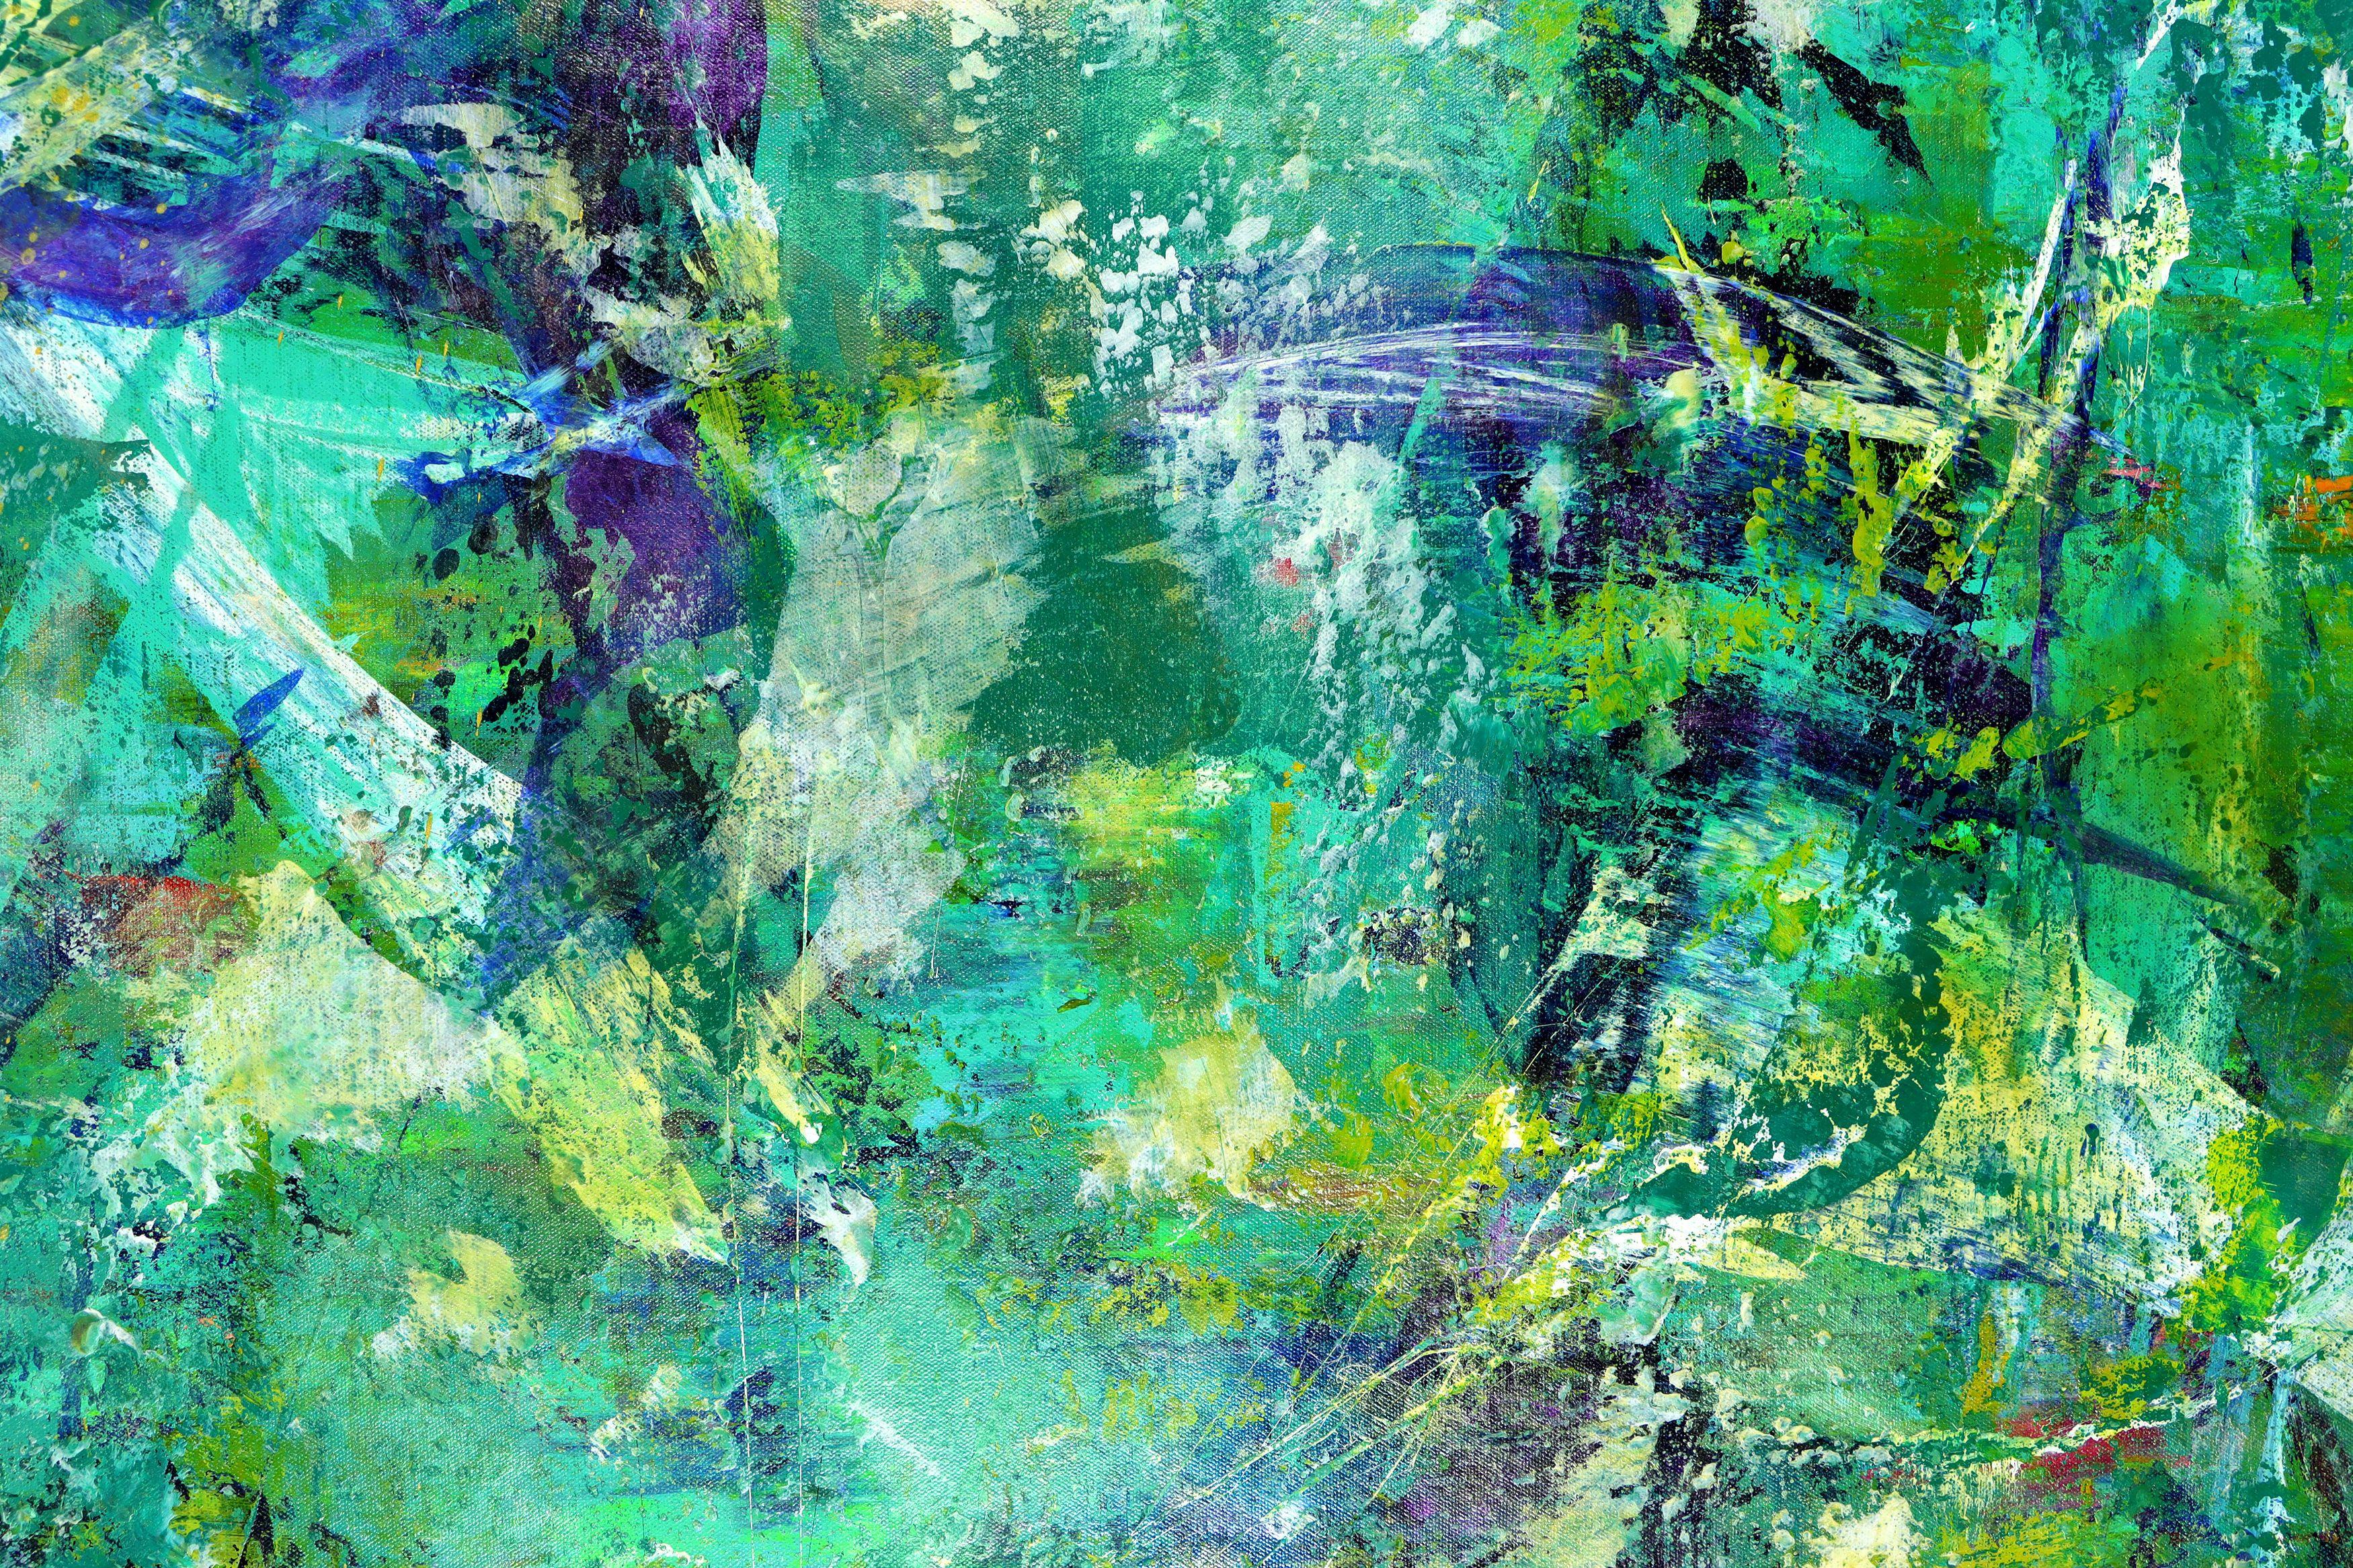 Large Statement Work! Impactful greenery and forest inspired abstract painting. Lots of texture and lush green combined and blended with teal, shades of blue with subtle gold and iridescent purple details. This oversized painting arrives signed in